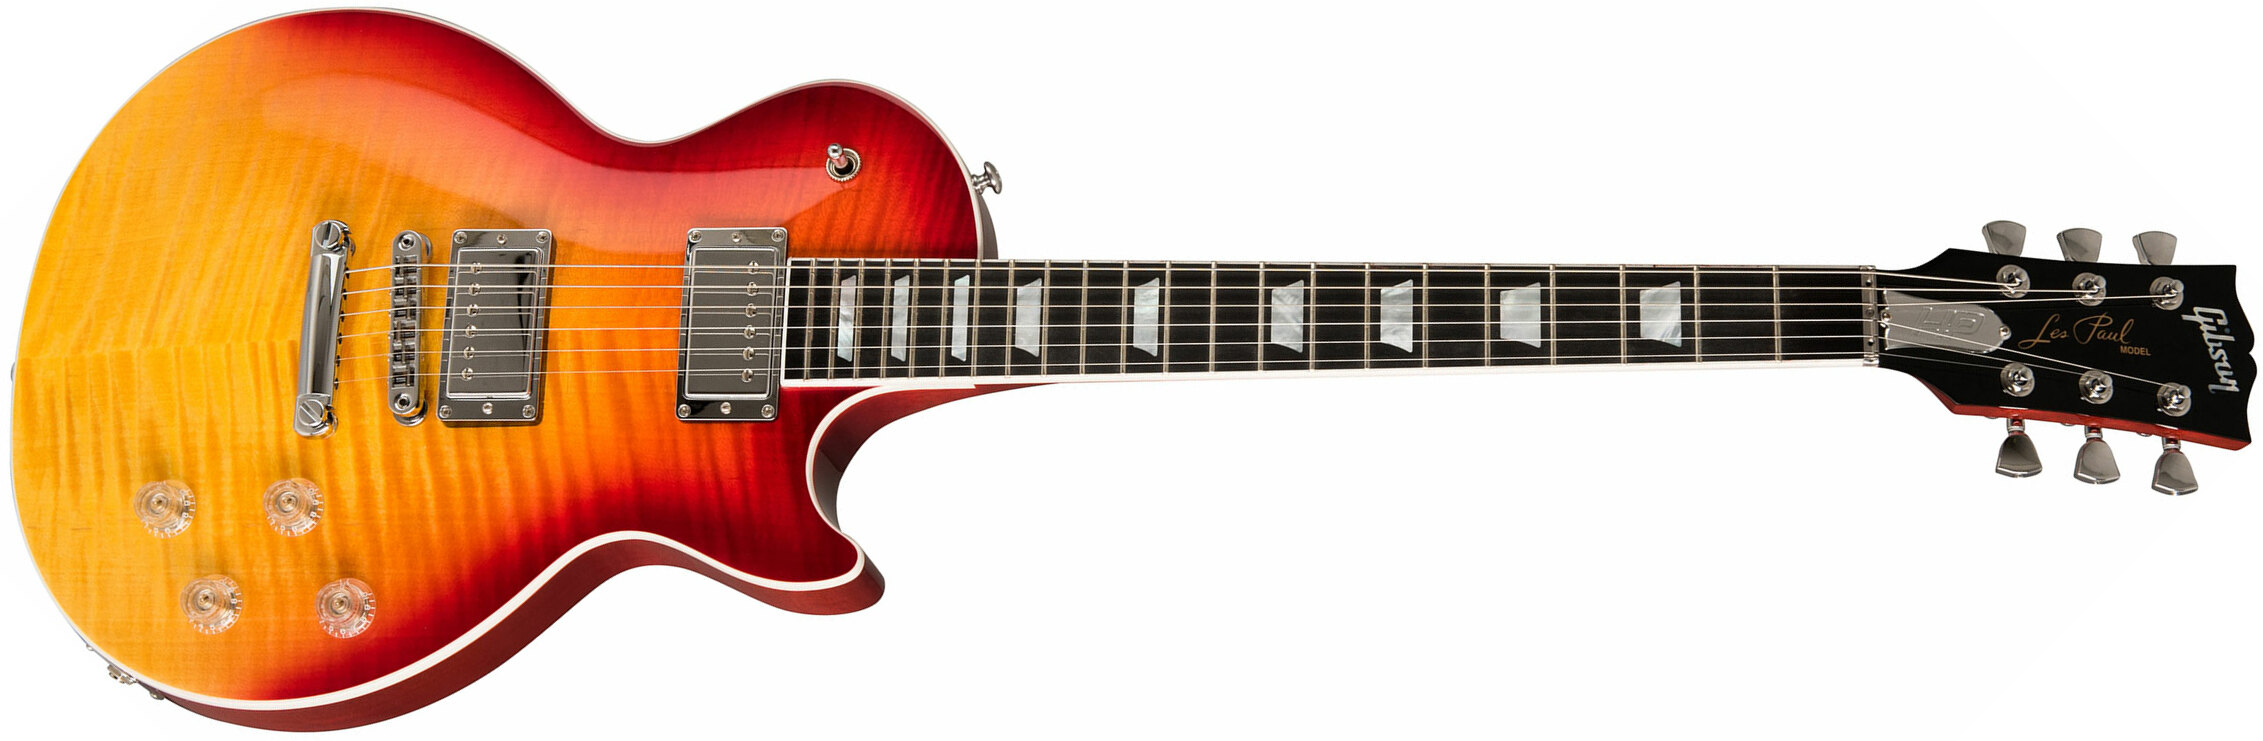 Gibson Les Paul Hp-ii High Performance 2019 2h Ht Ric - Heritage Cherry Fade - Single cut electric guitar - Main picture